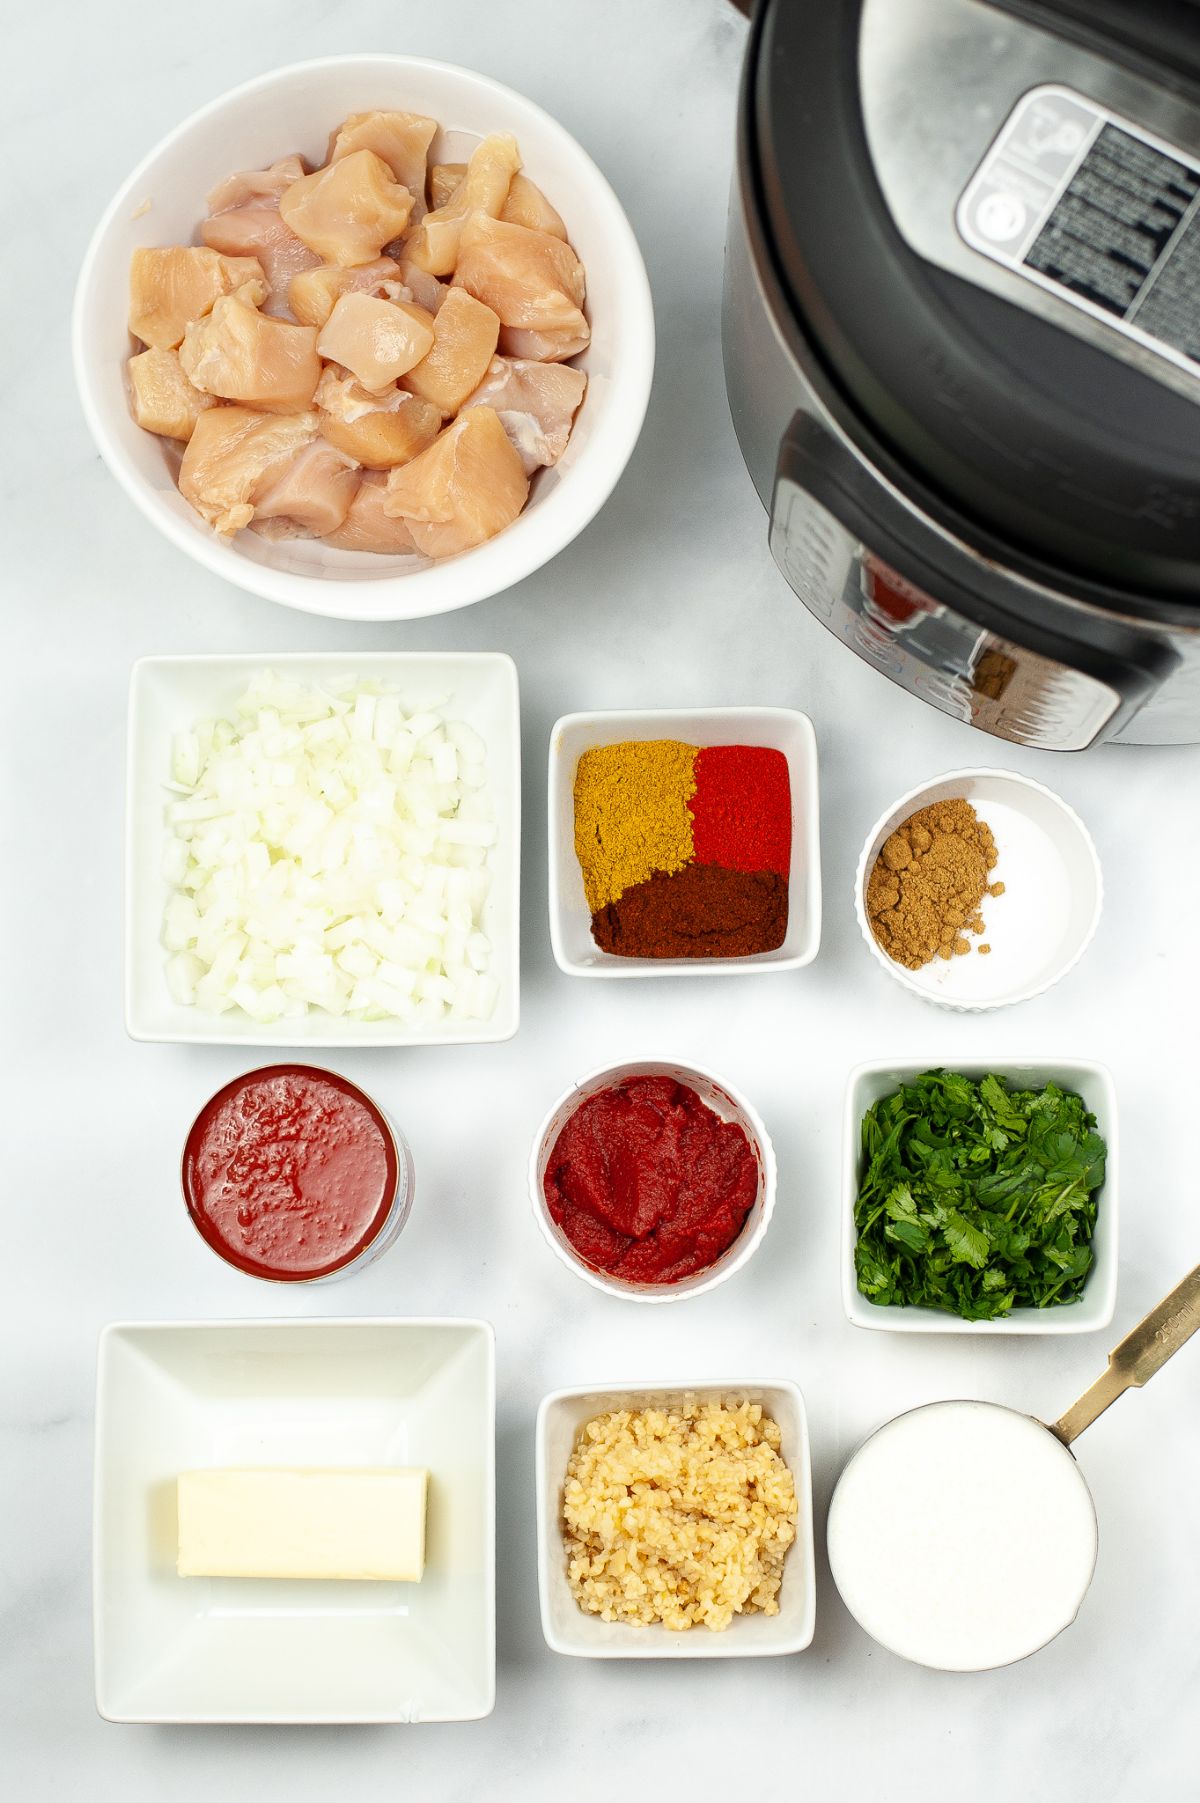 Ingredients used to make Instant Pot Butter Chicken.